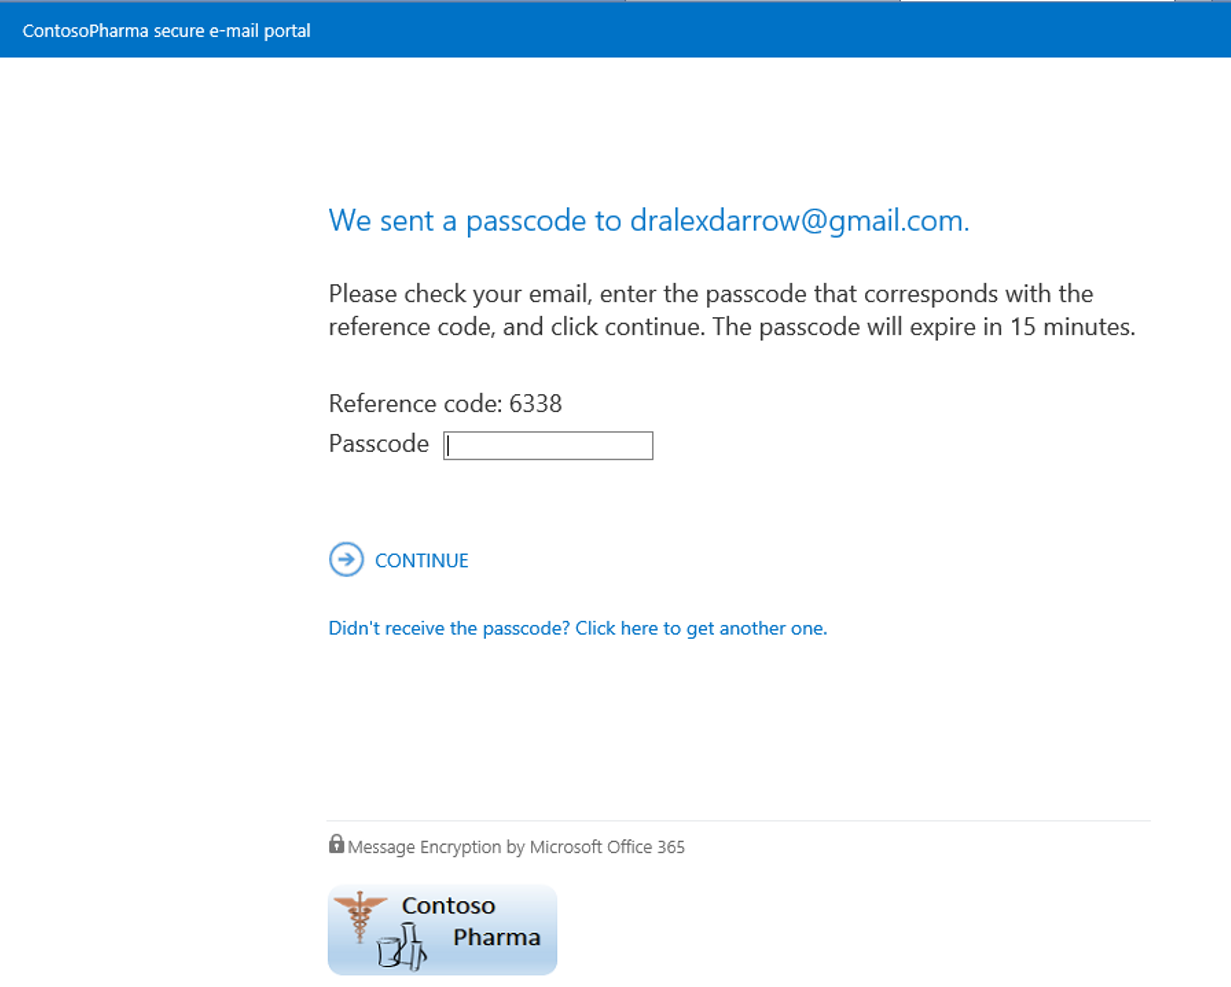 office 365 message encryption review